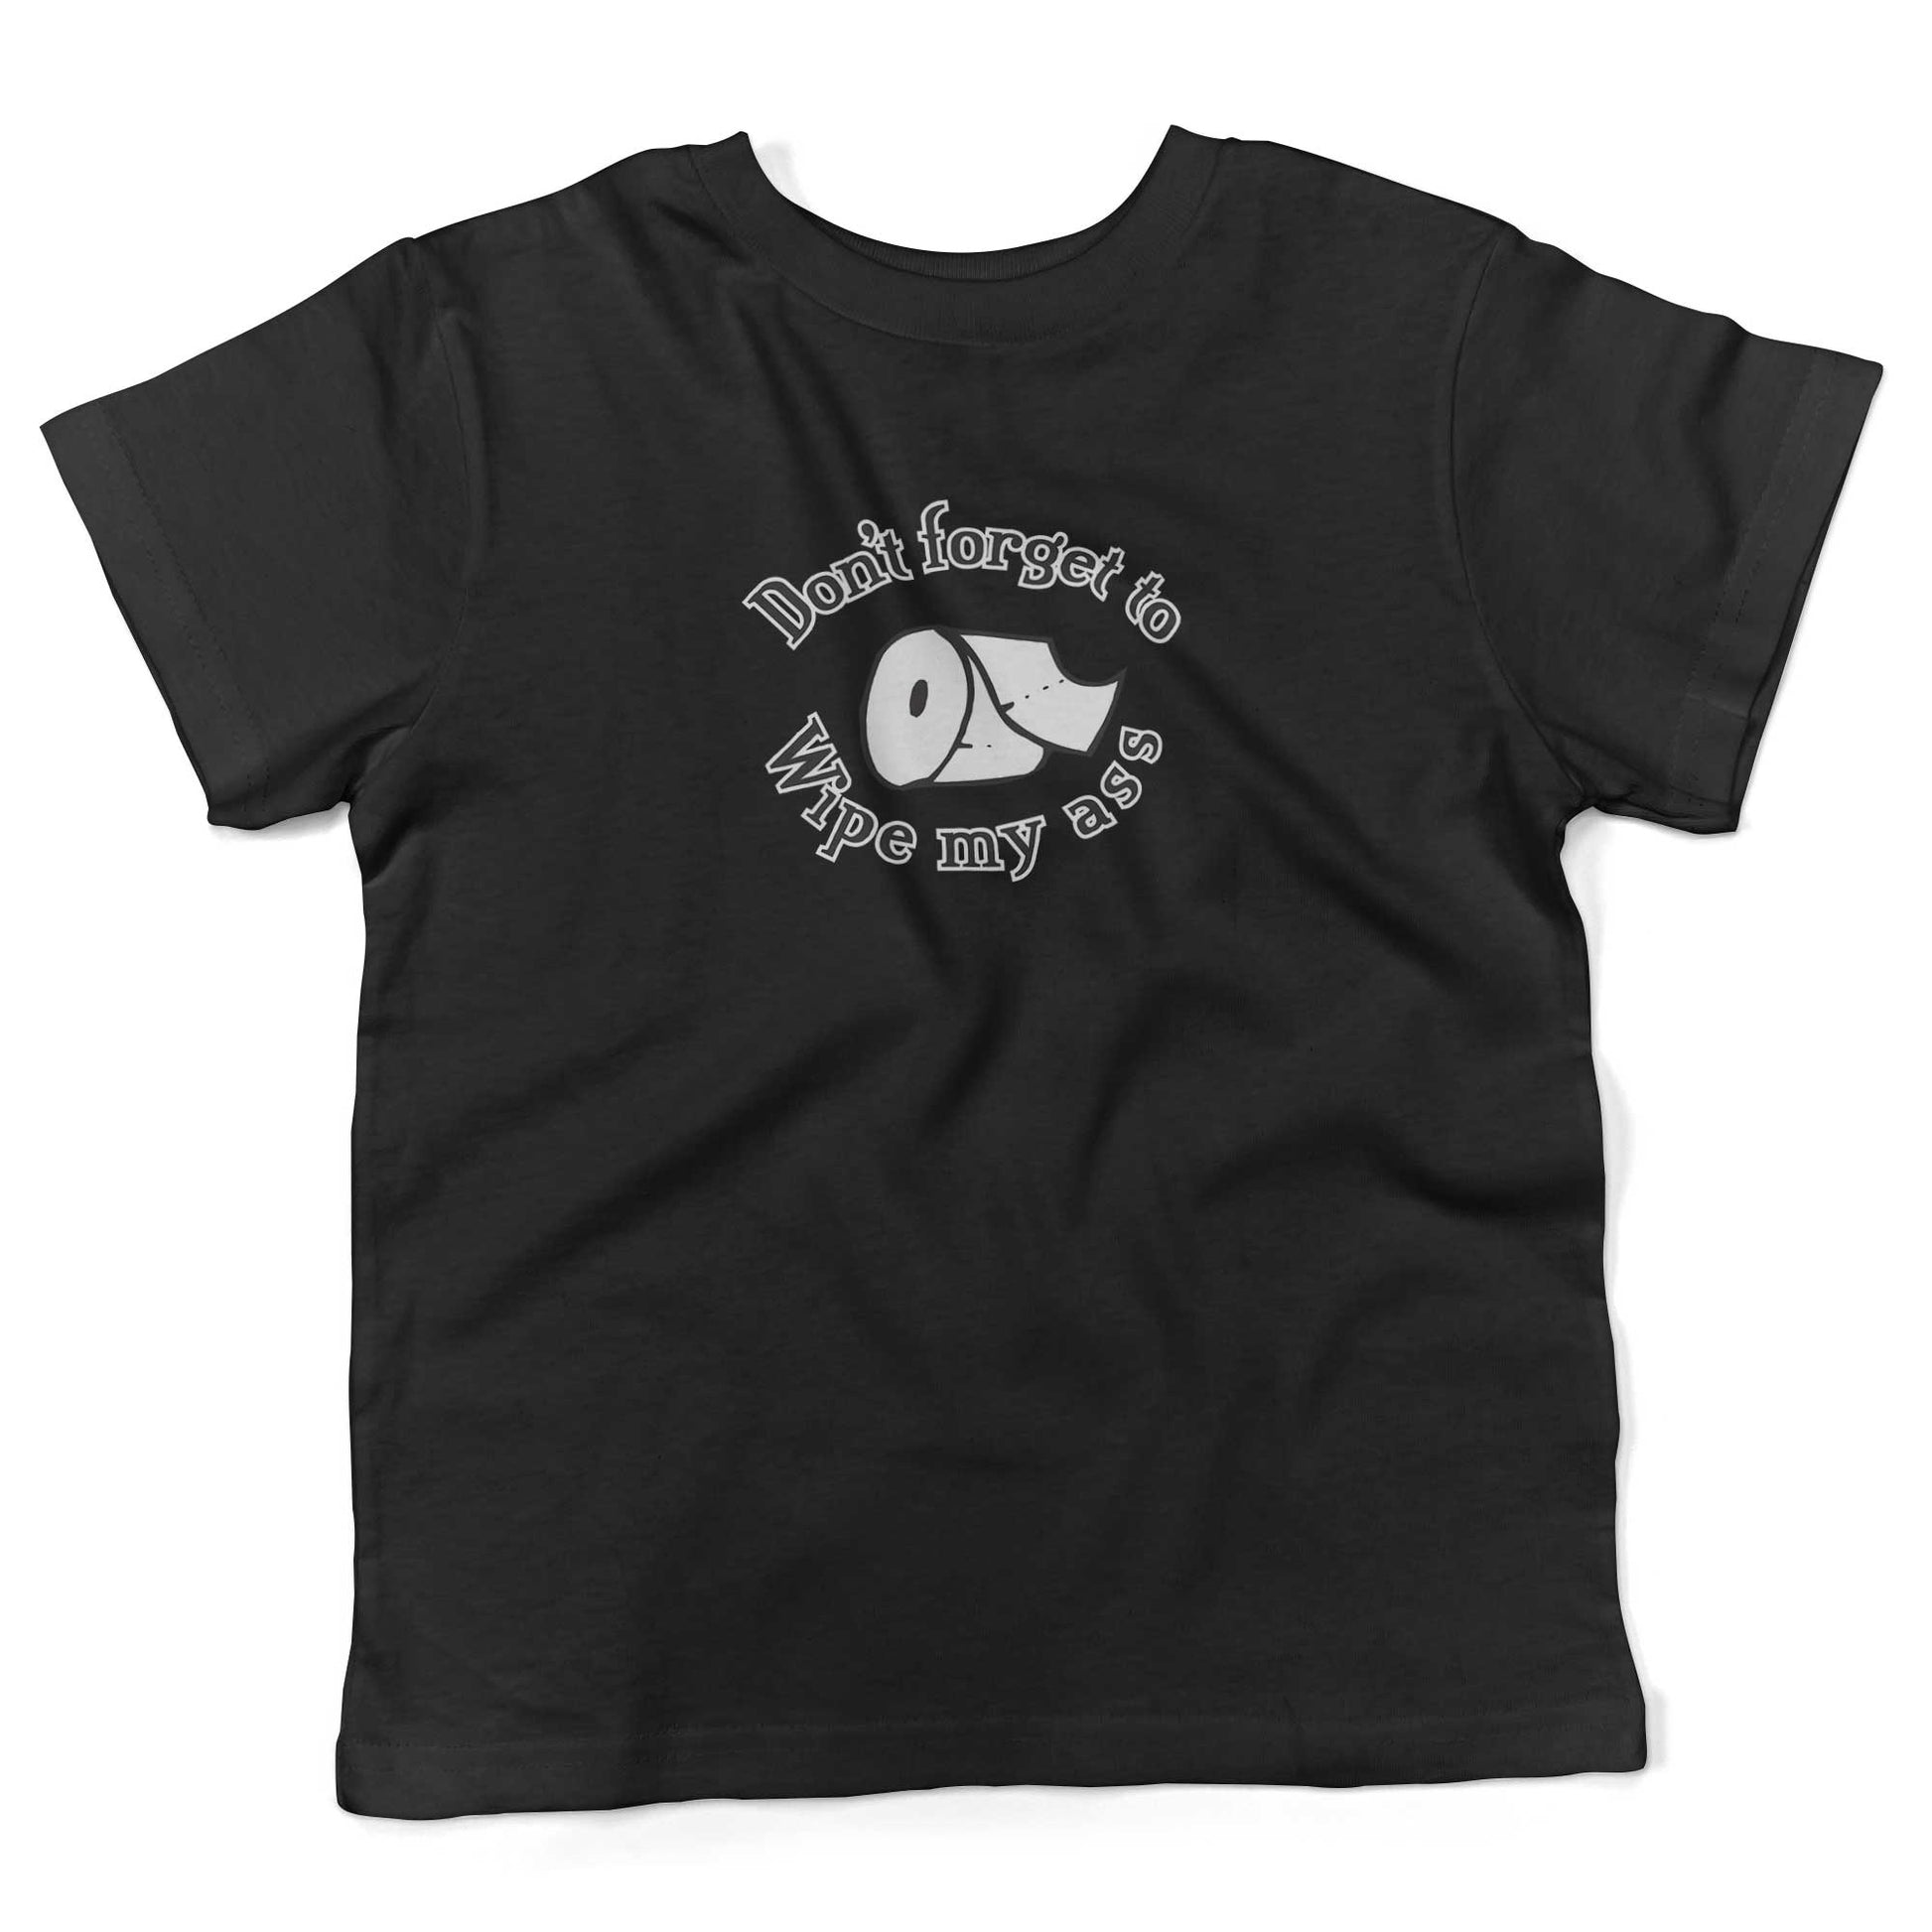 Don't Forget To Wipe My Ass Toddler Shirt-Organic Black-2T